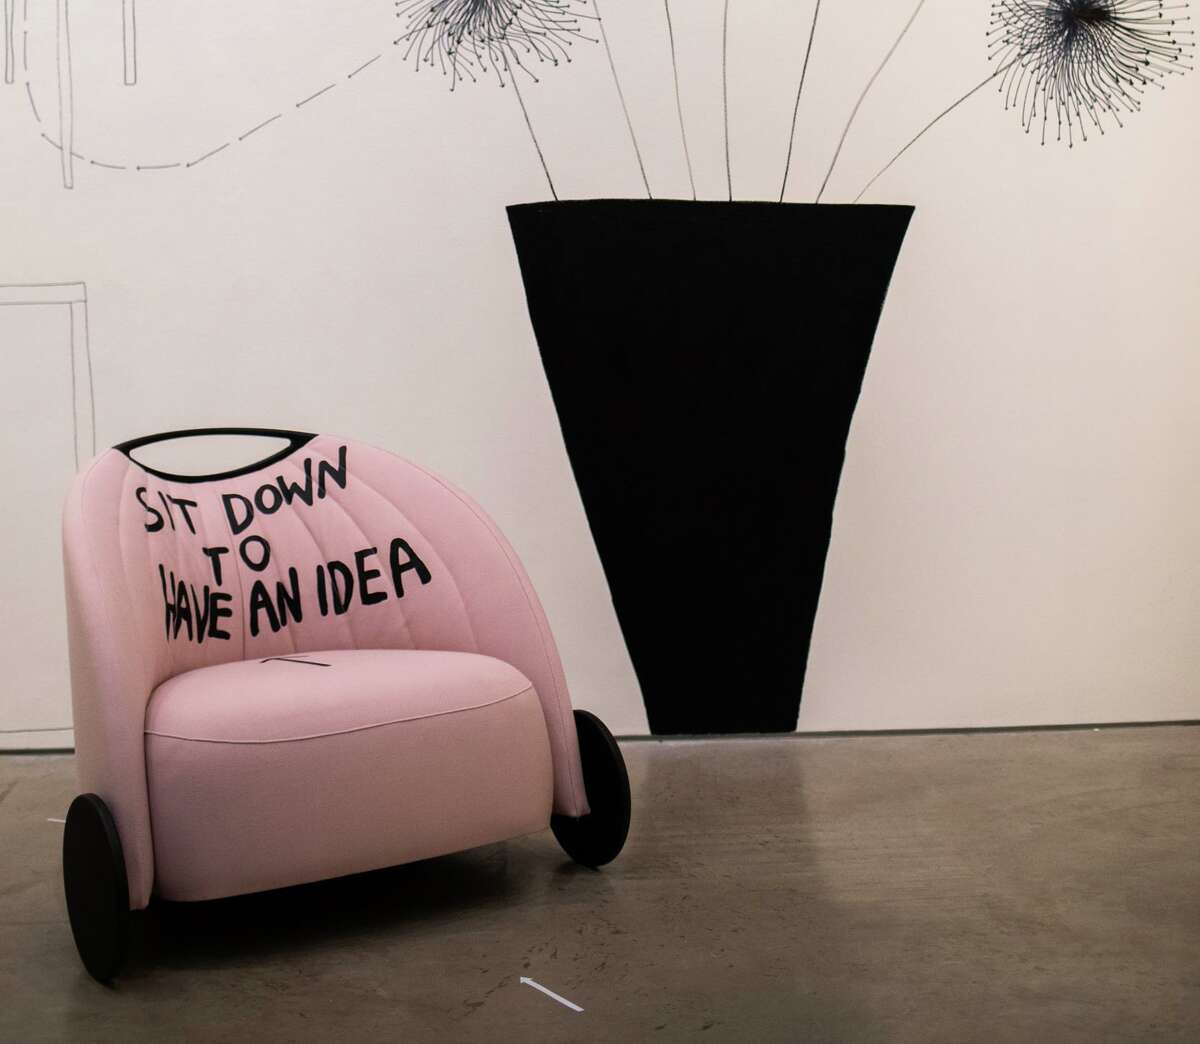 ‘Sit Down To Have an Idea’ limited edition BIGA chair by Italian artist Andrea Bianconi at the Barbara Davis Gallery, Friday, July 8, 2022, in Houston.